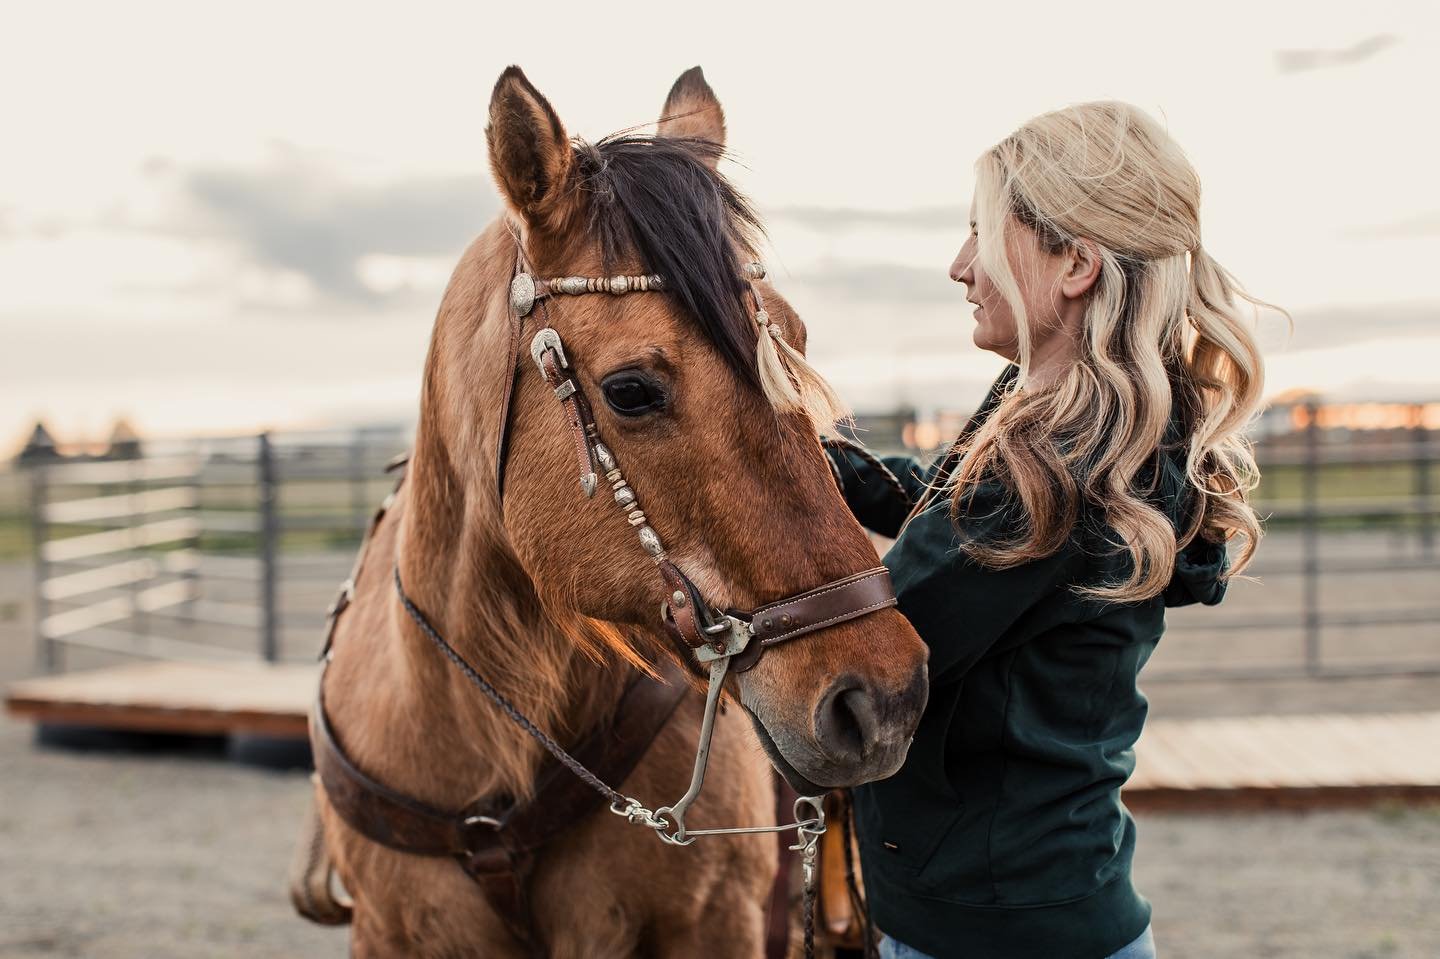 Sometimes motherhood is sitting in a field with flowers and sometimes it's taking your kid out for his first horseback ride.

I'm now offering documentary family sessions where I tag along with your family for your favorite activities 

Horseback rid